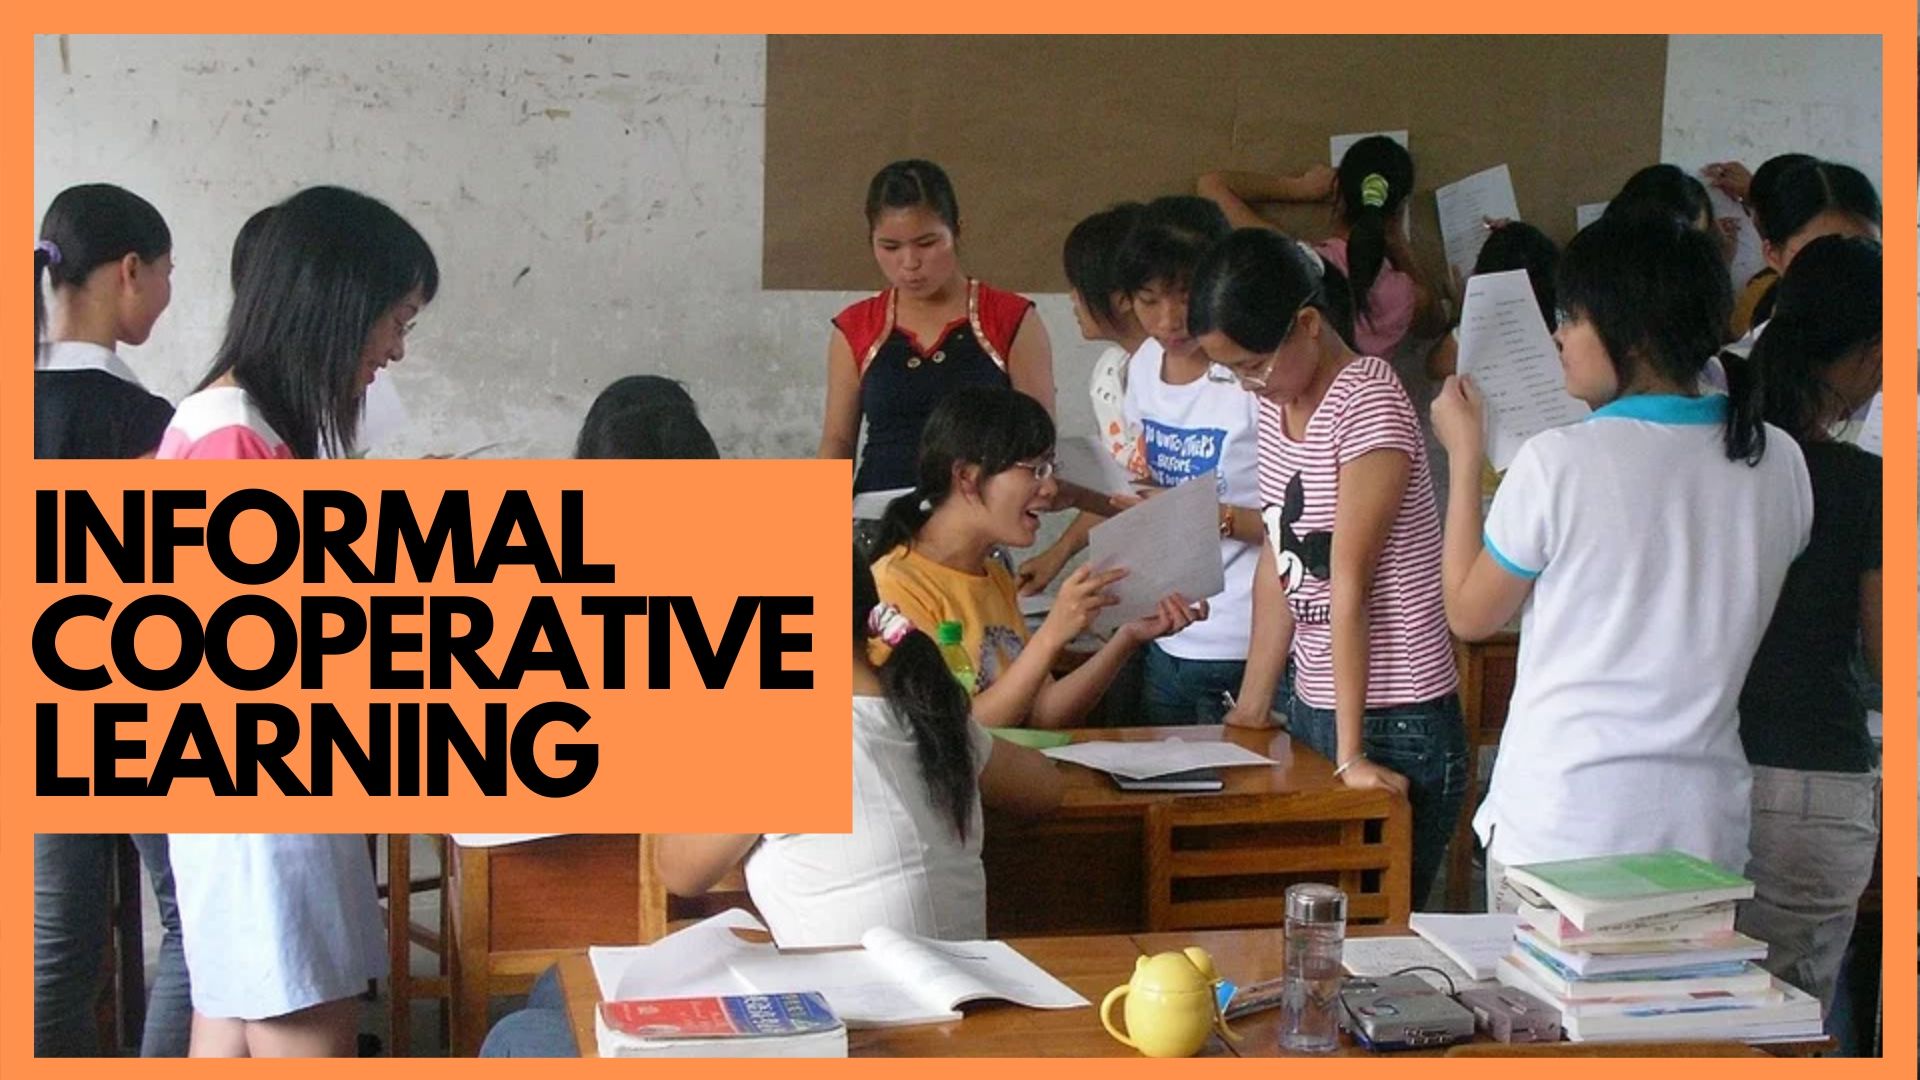 INFORMAL COOPERATIVE LEARNING